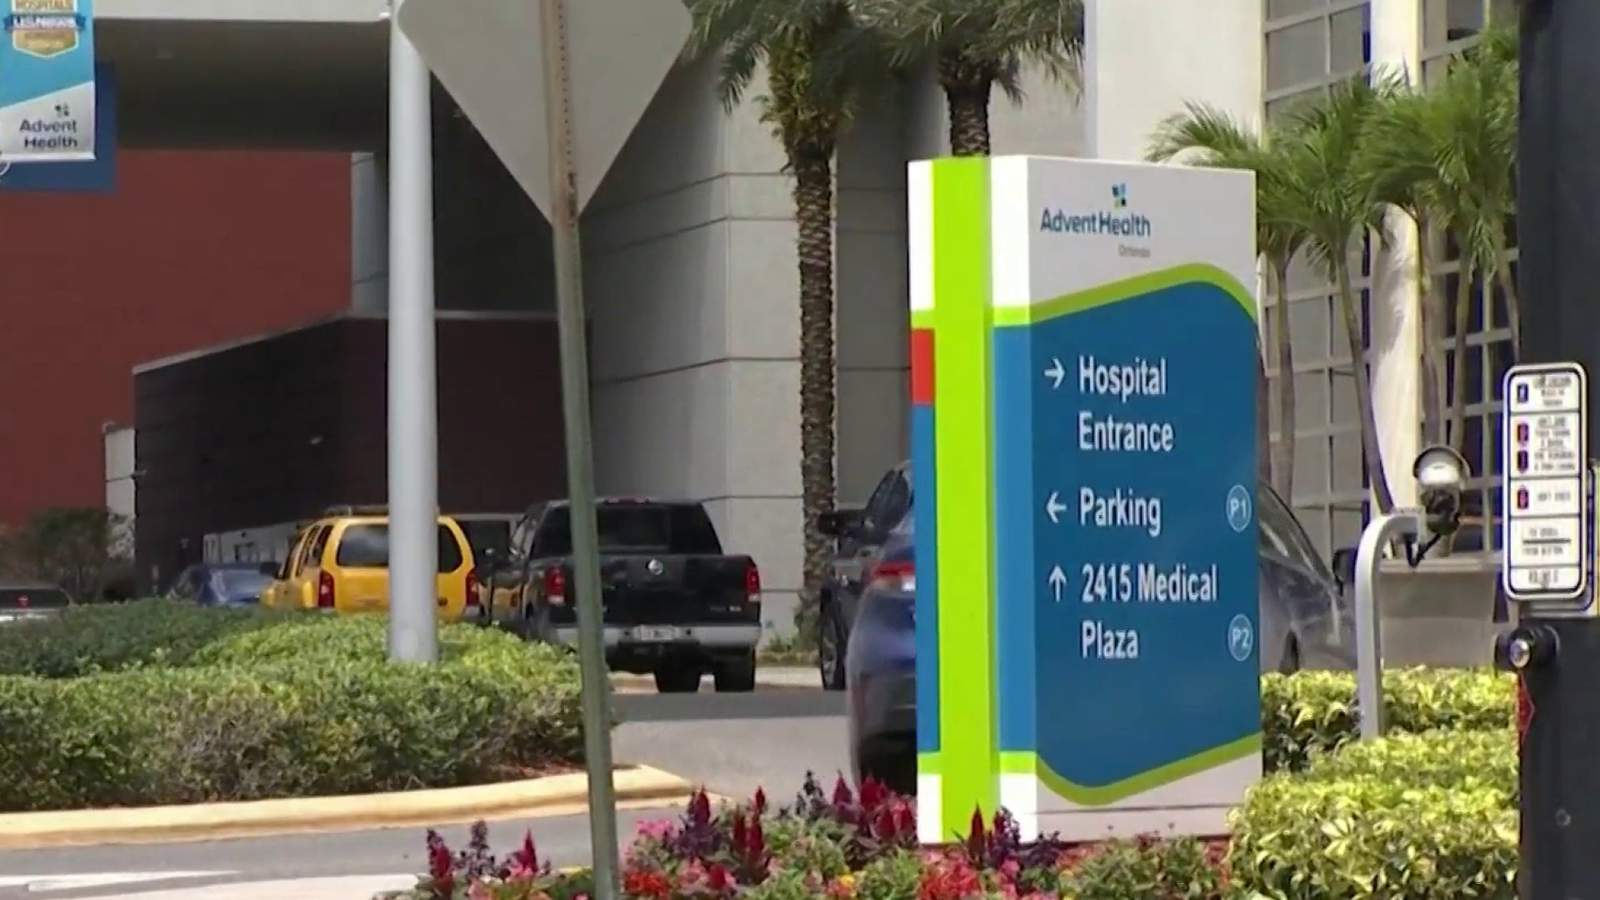 AdventHealth terminates contract with lab after unreliable testing